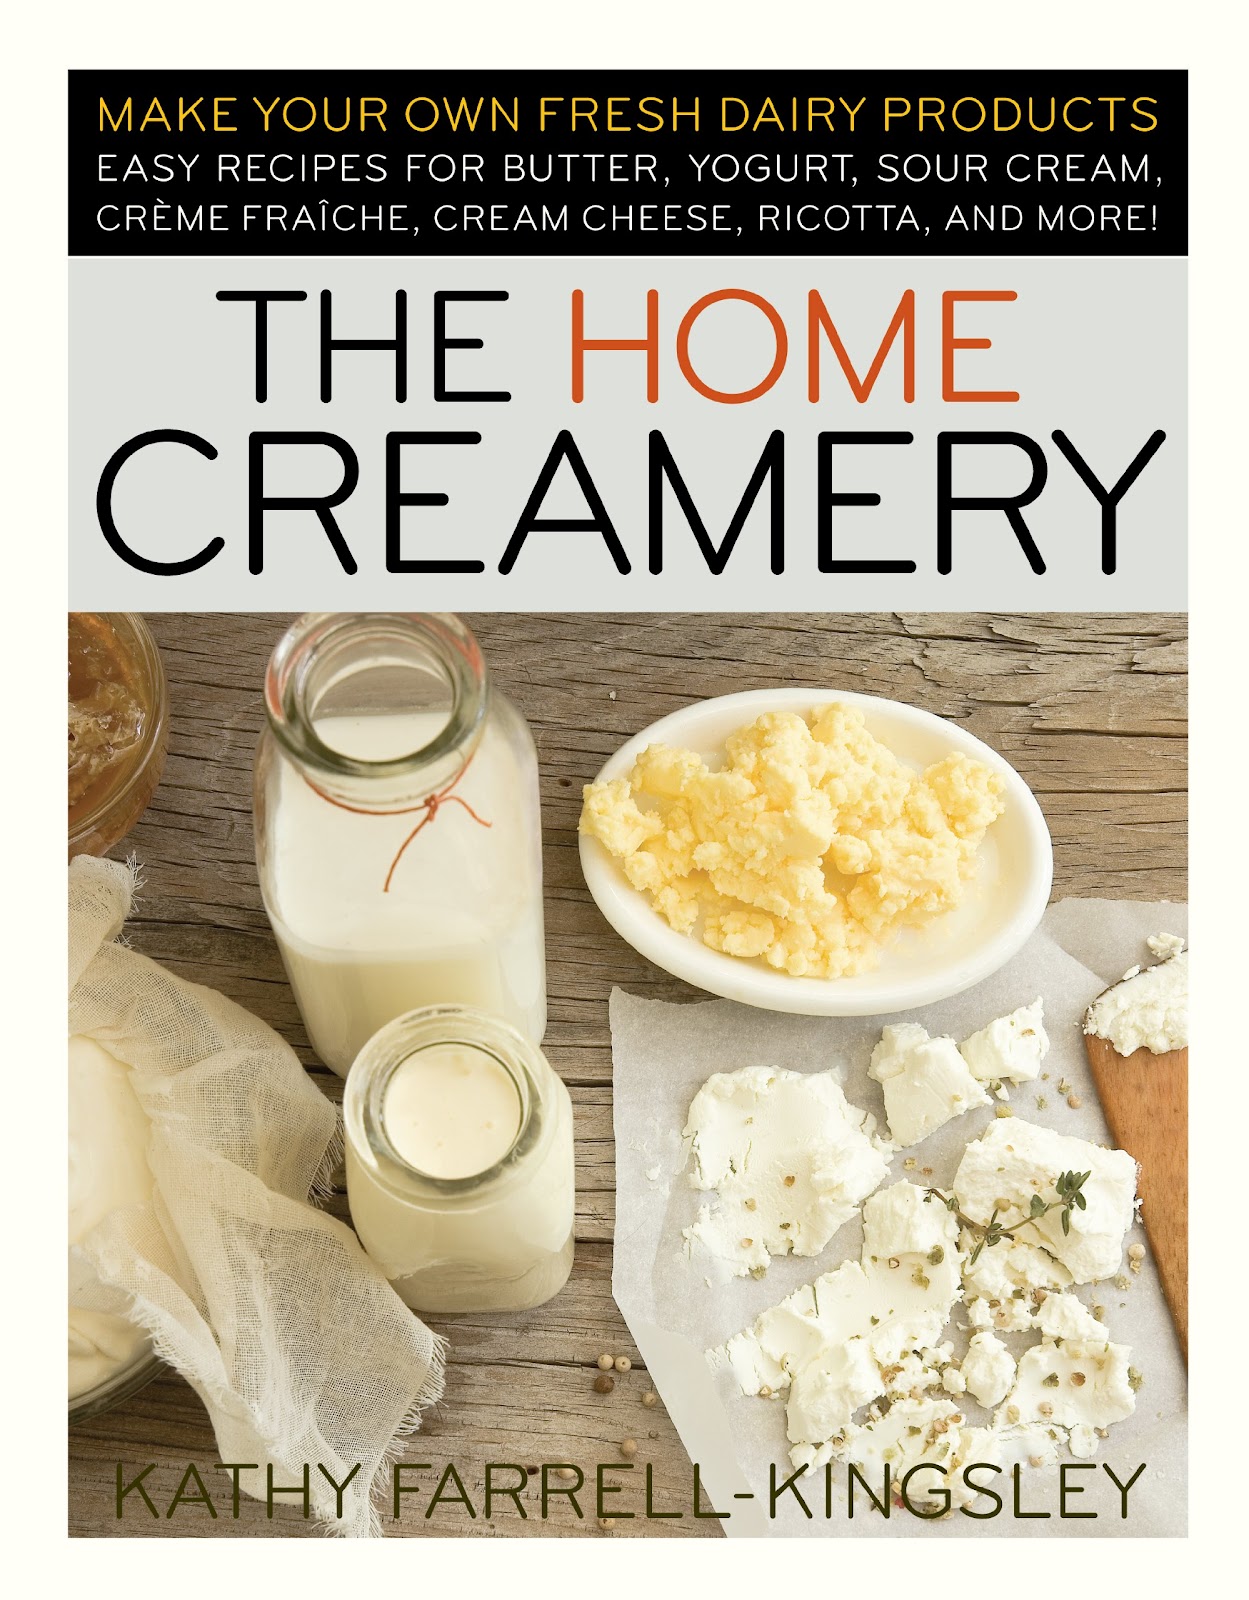 Text Books - The Home Creamery: Make Your Own Fresh Dairy Products; Easy Recipes for Butter, Yogurt, Sour Cream, Creme Fraiche, Cream Cheese, Ricotta, and More!